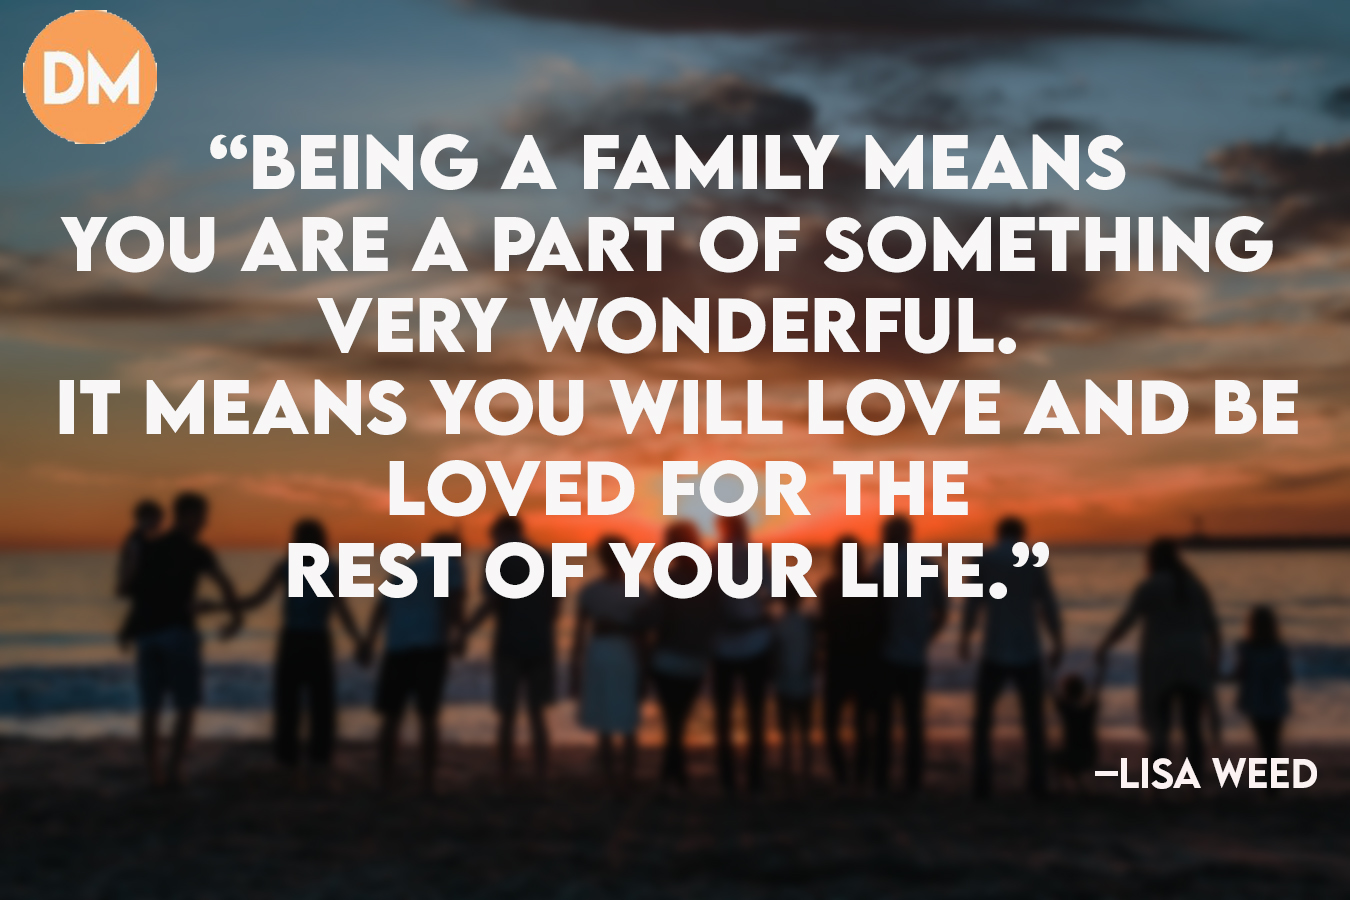 “Being a family means you are a part of something very wonderful. It means you will love and be loved for the rest of your life.”